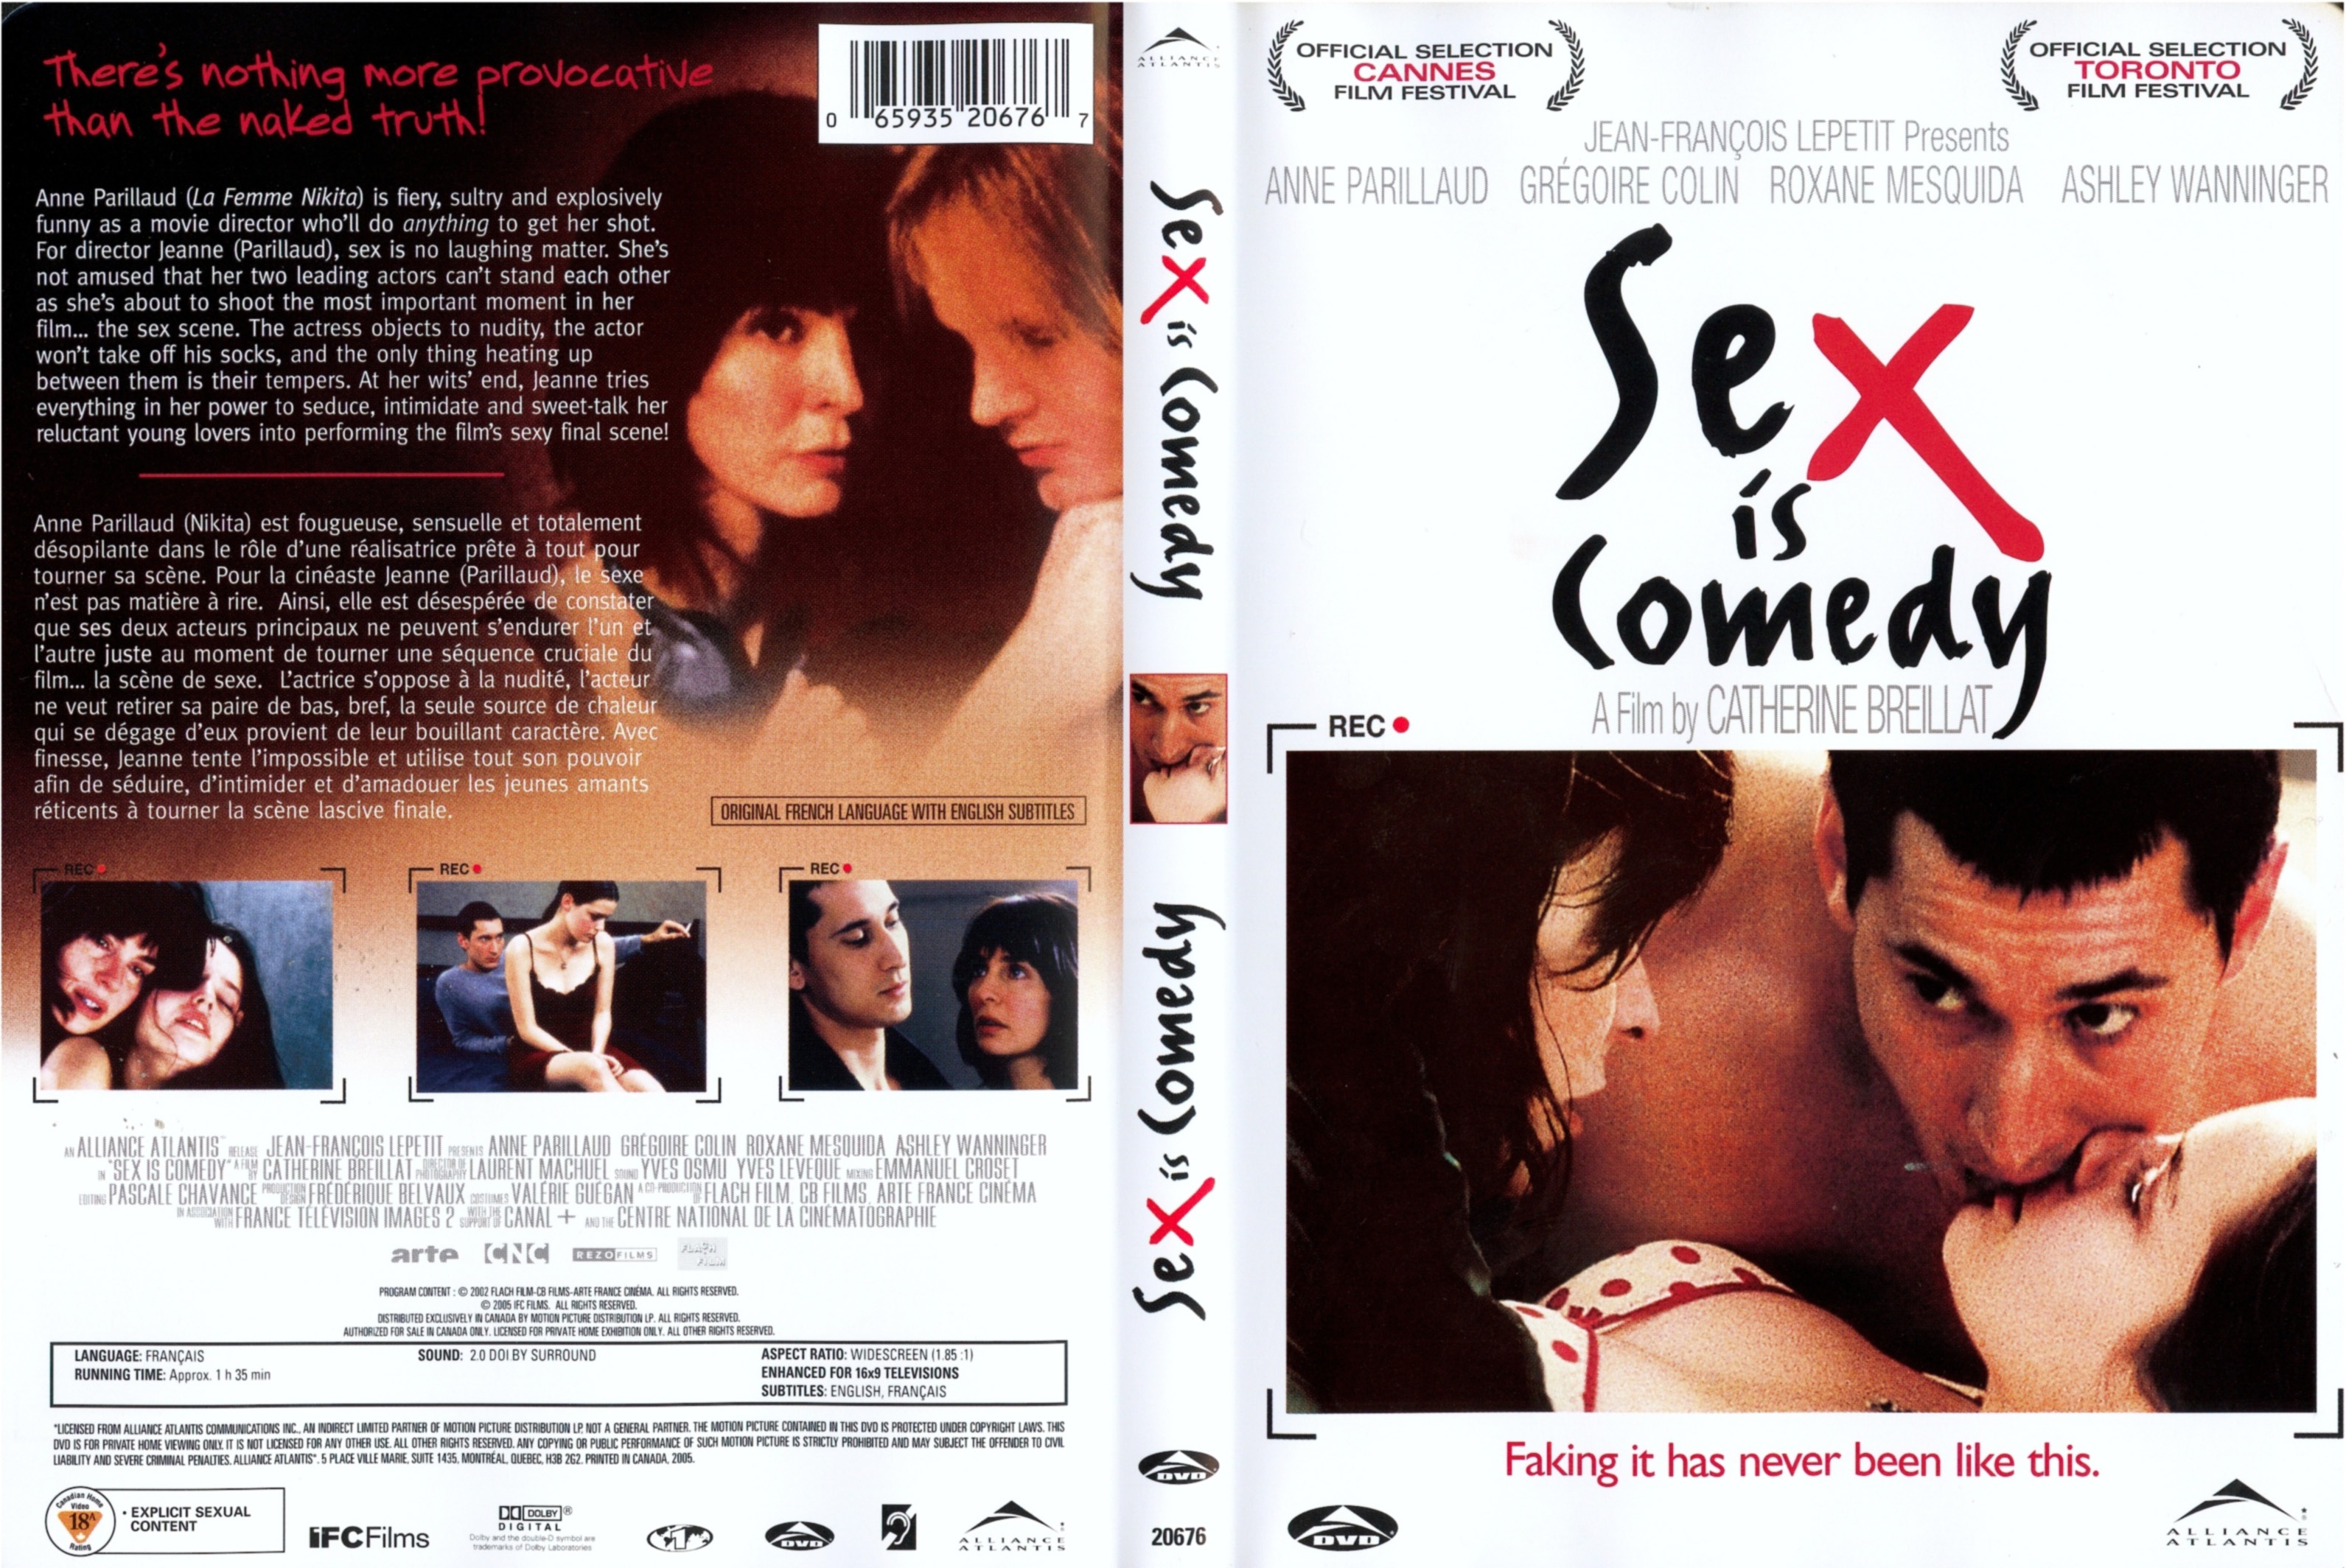 Jaquette DVD Sex is comedy v2